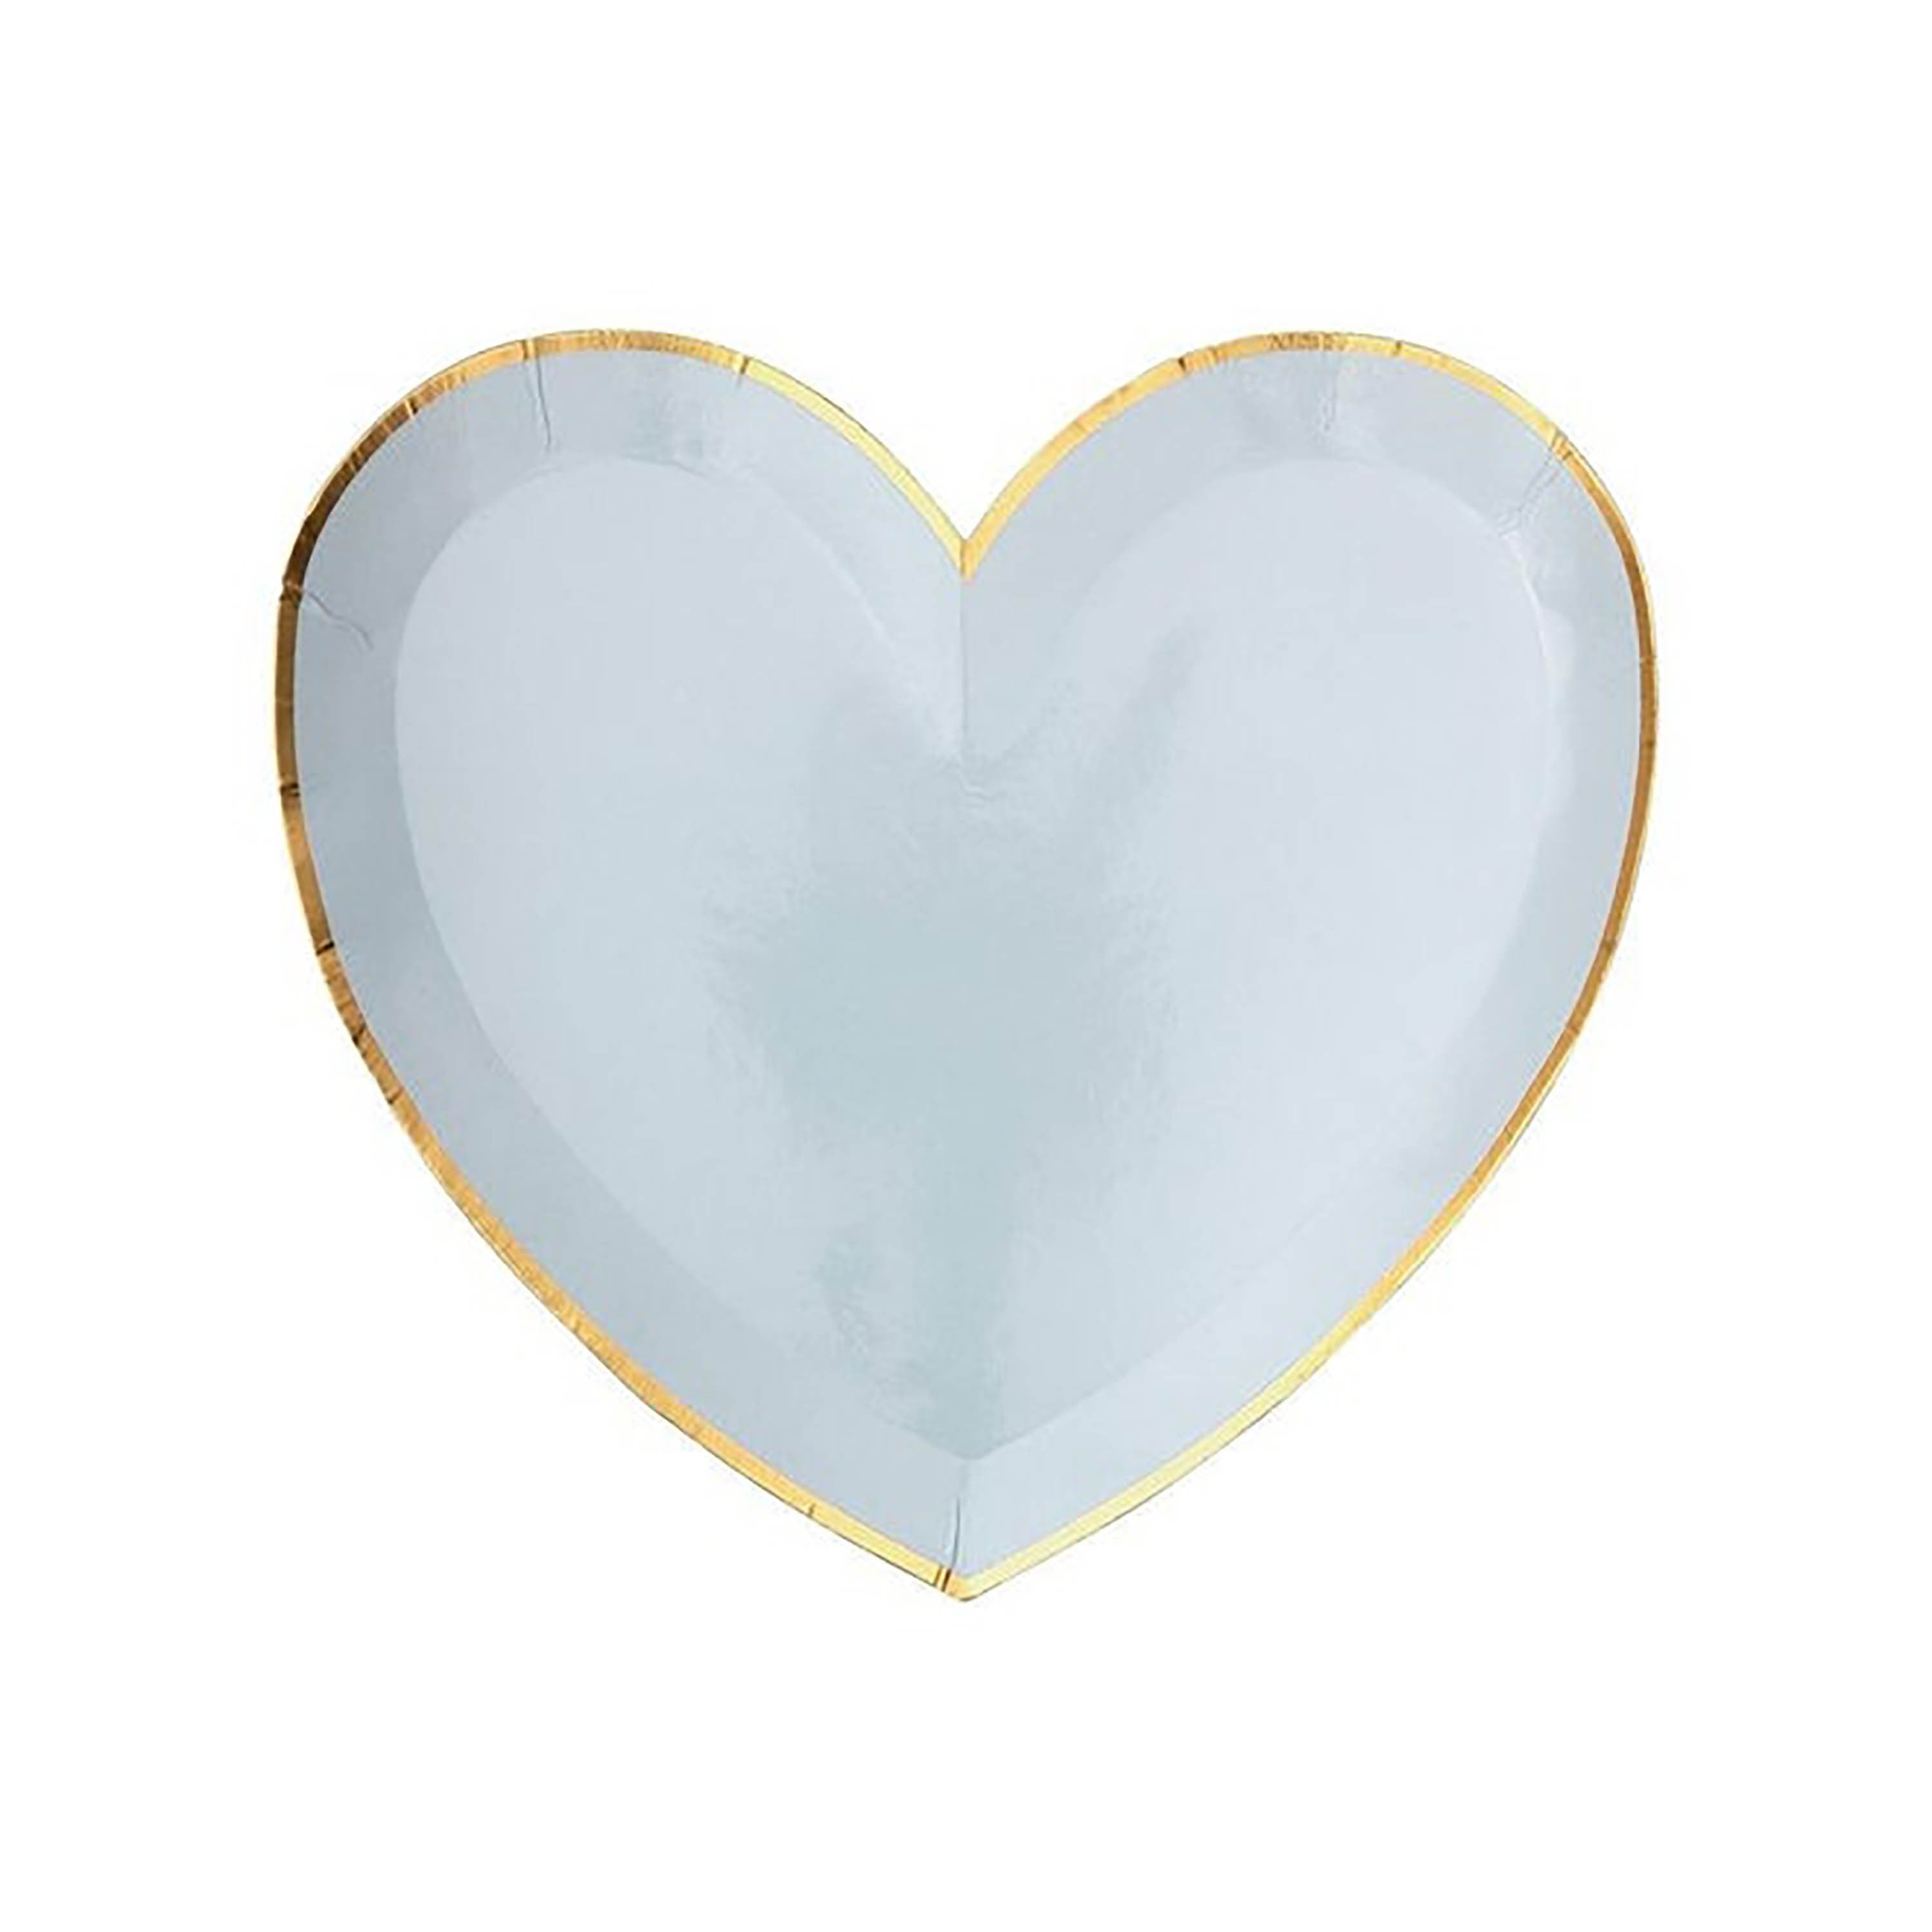 Heart Shaped Plates | Valentine Dinner Plates - Valentine Plate - Heart Plates - Valentine Party Decor - Valentine Theme Party